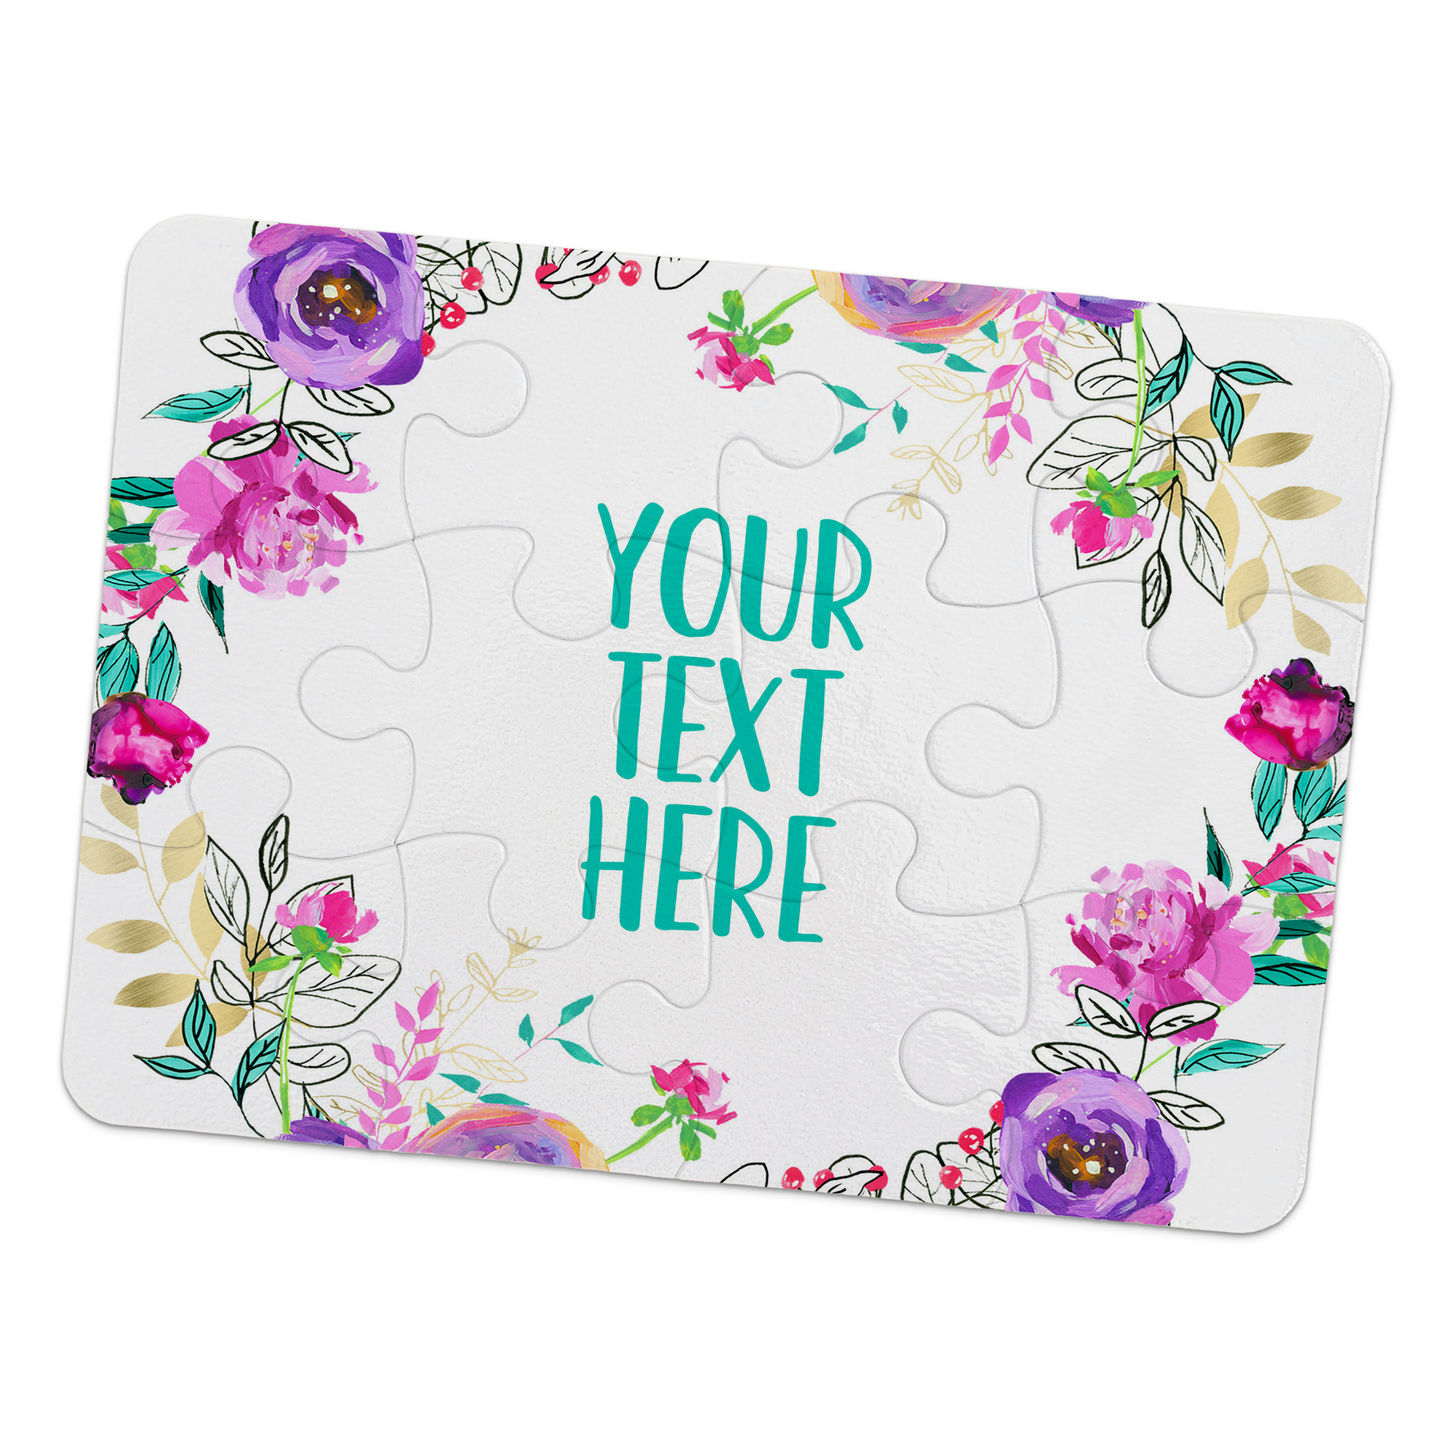 Create Your Own Puzzle - Floral Design - CYOP0152 | S'Berry Boutique